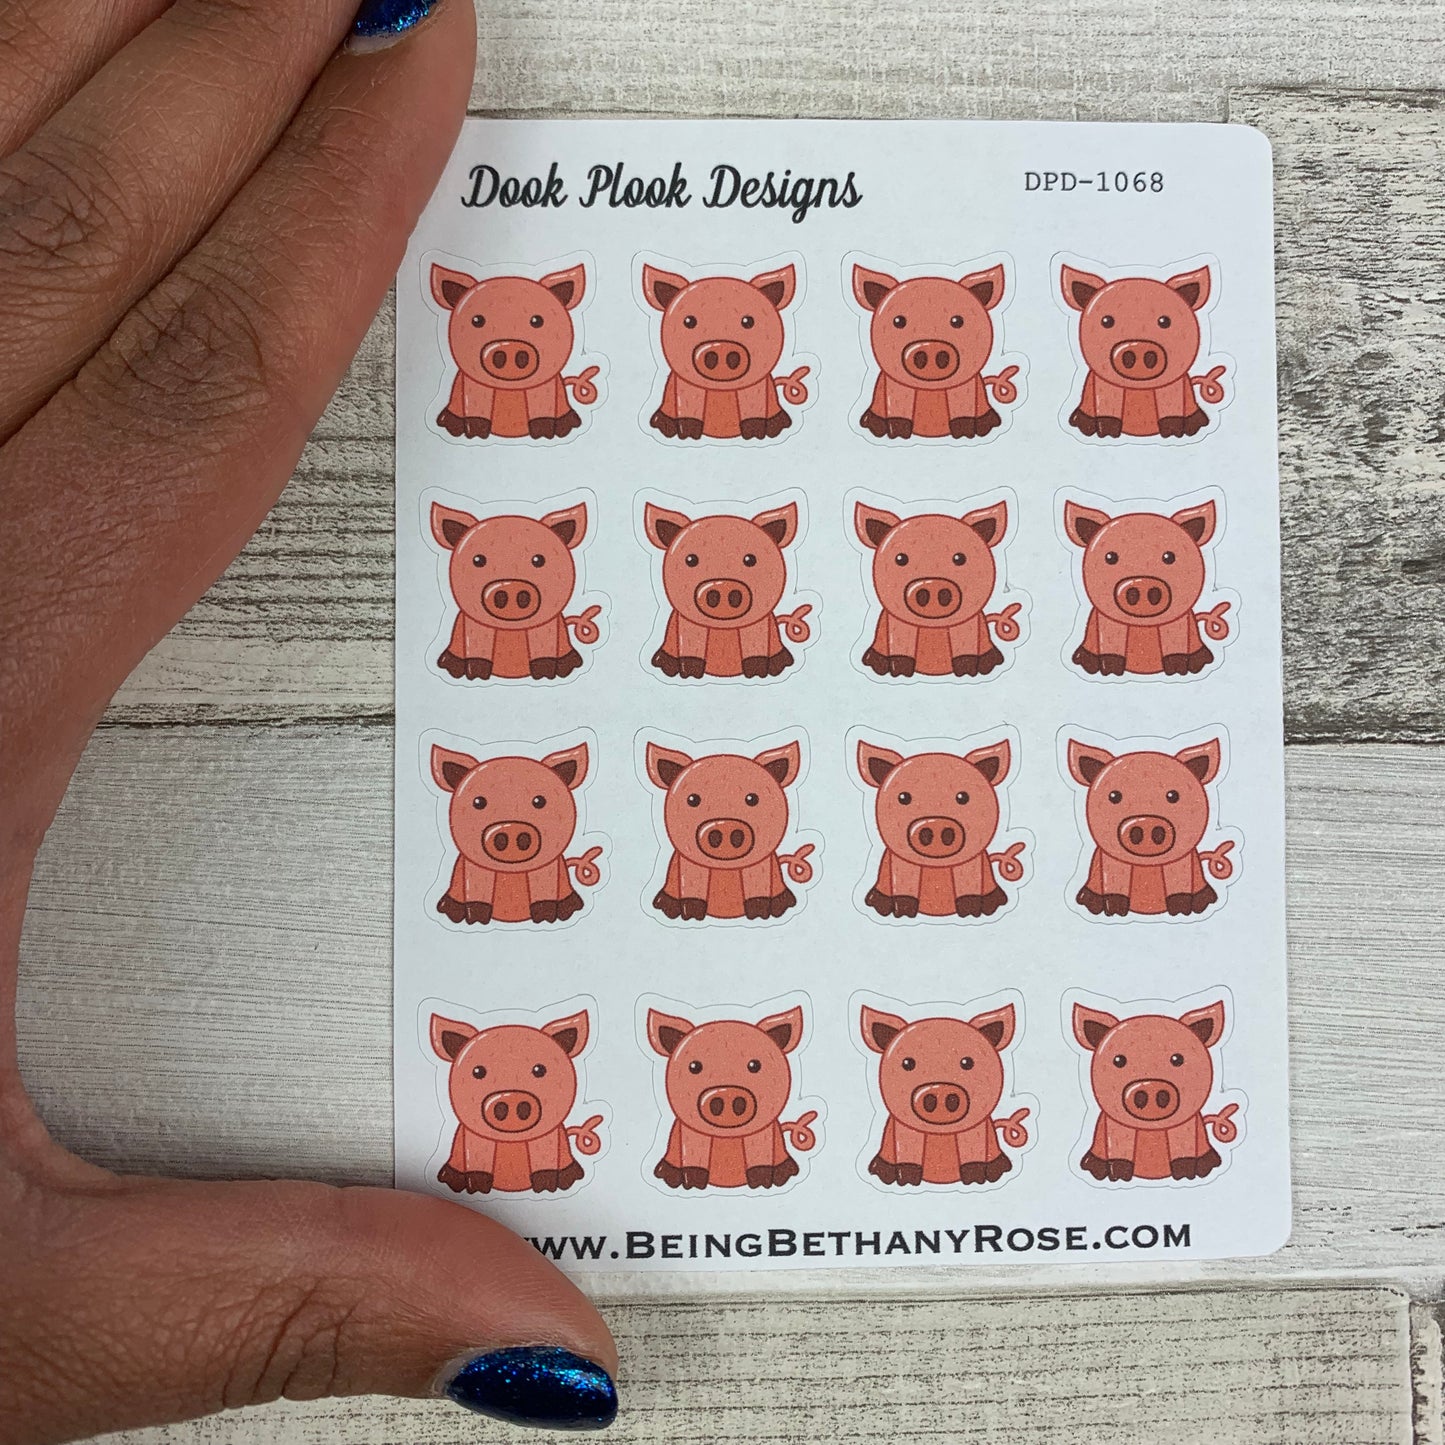 Pig stickers (DPD1068)